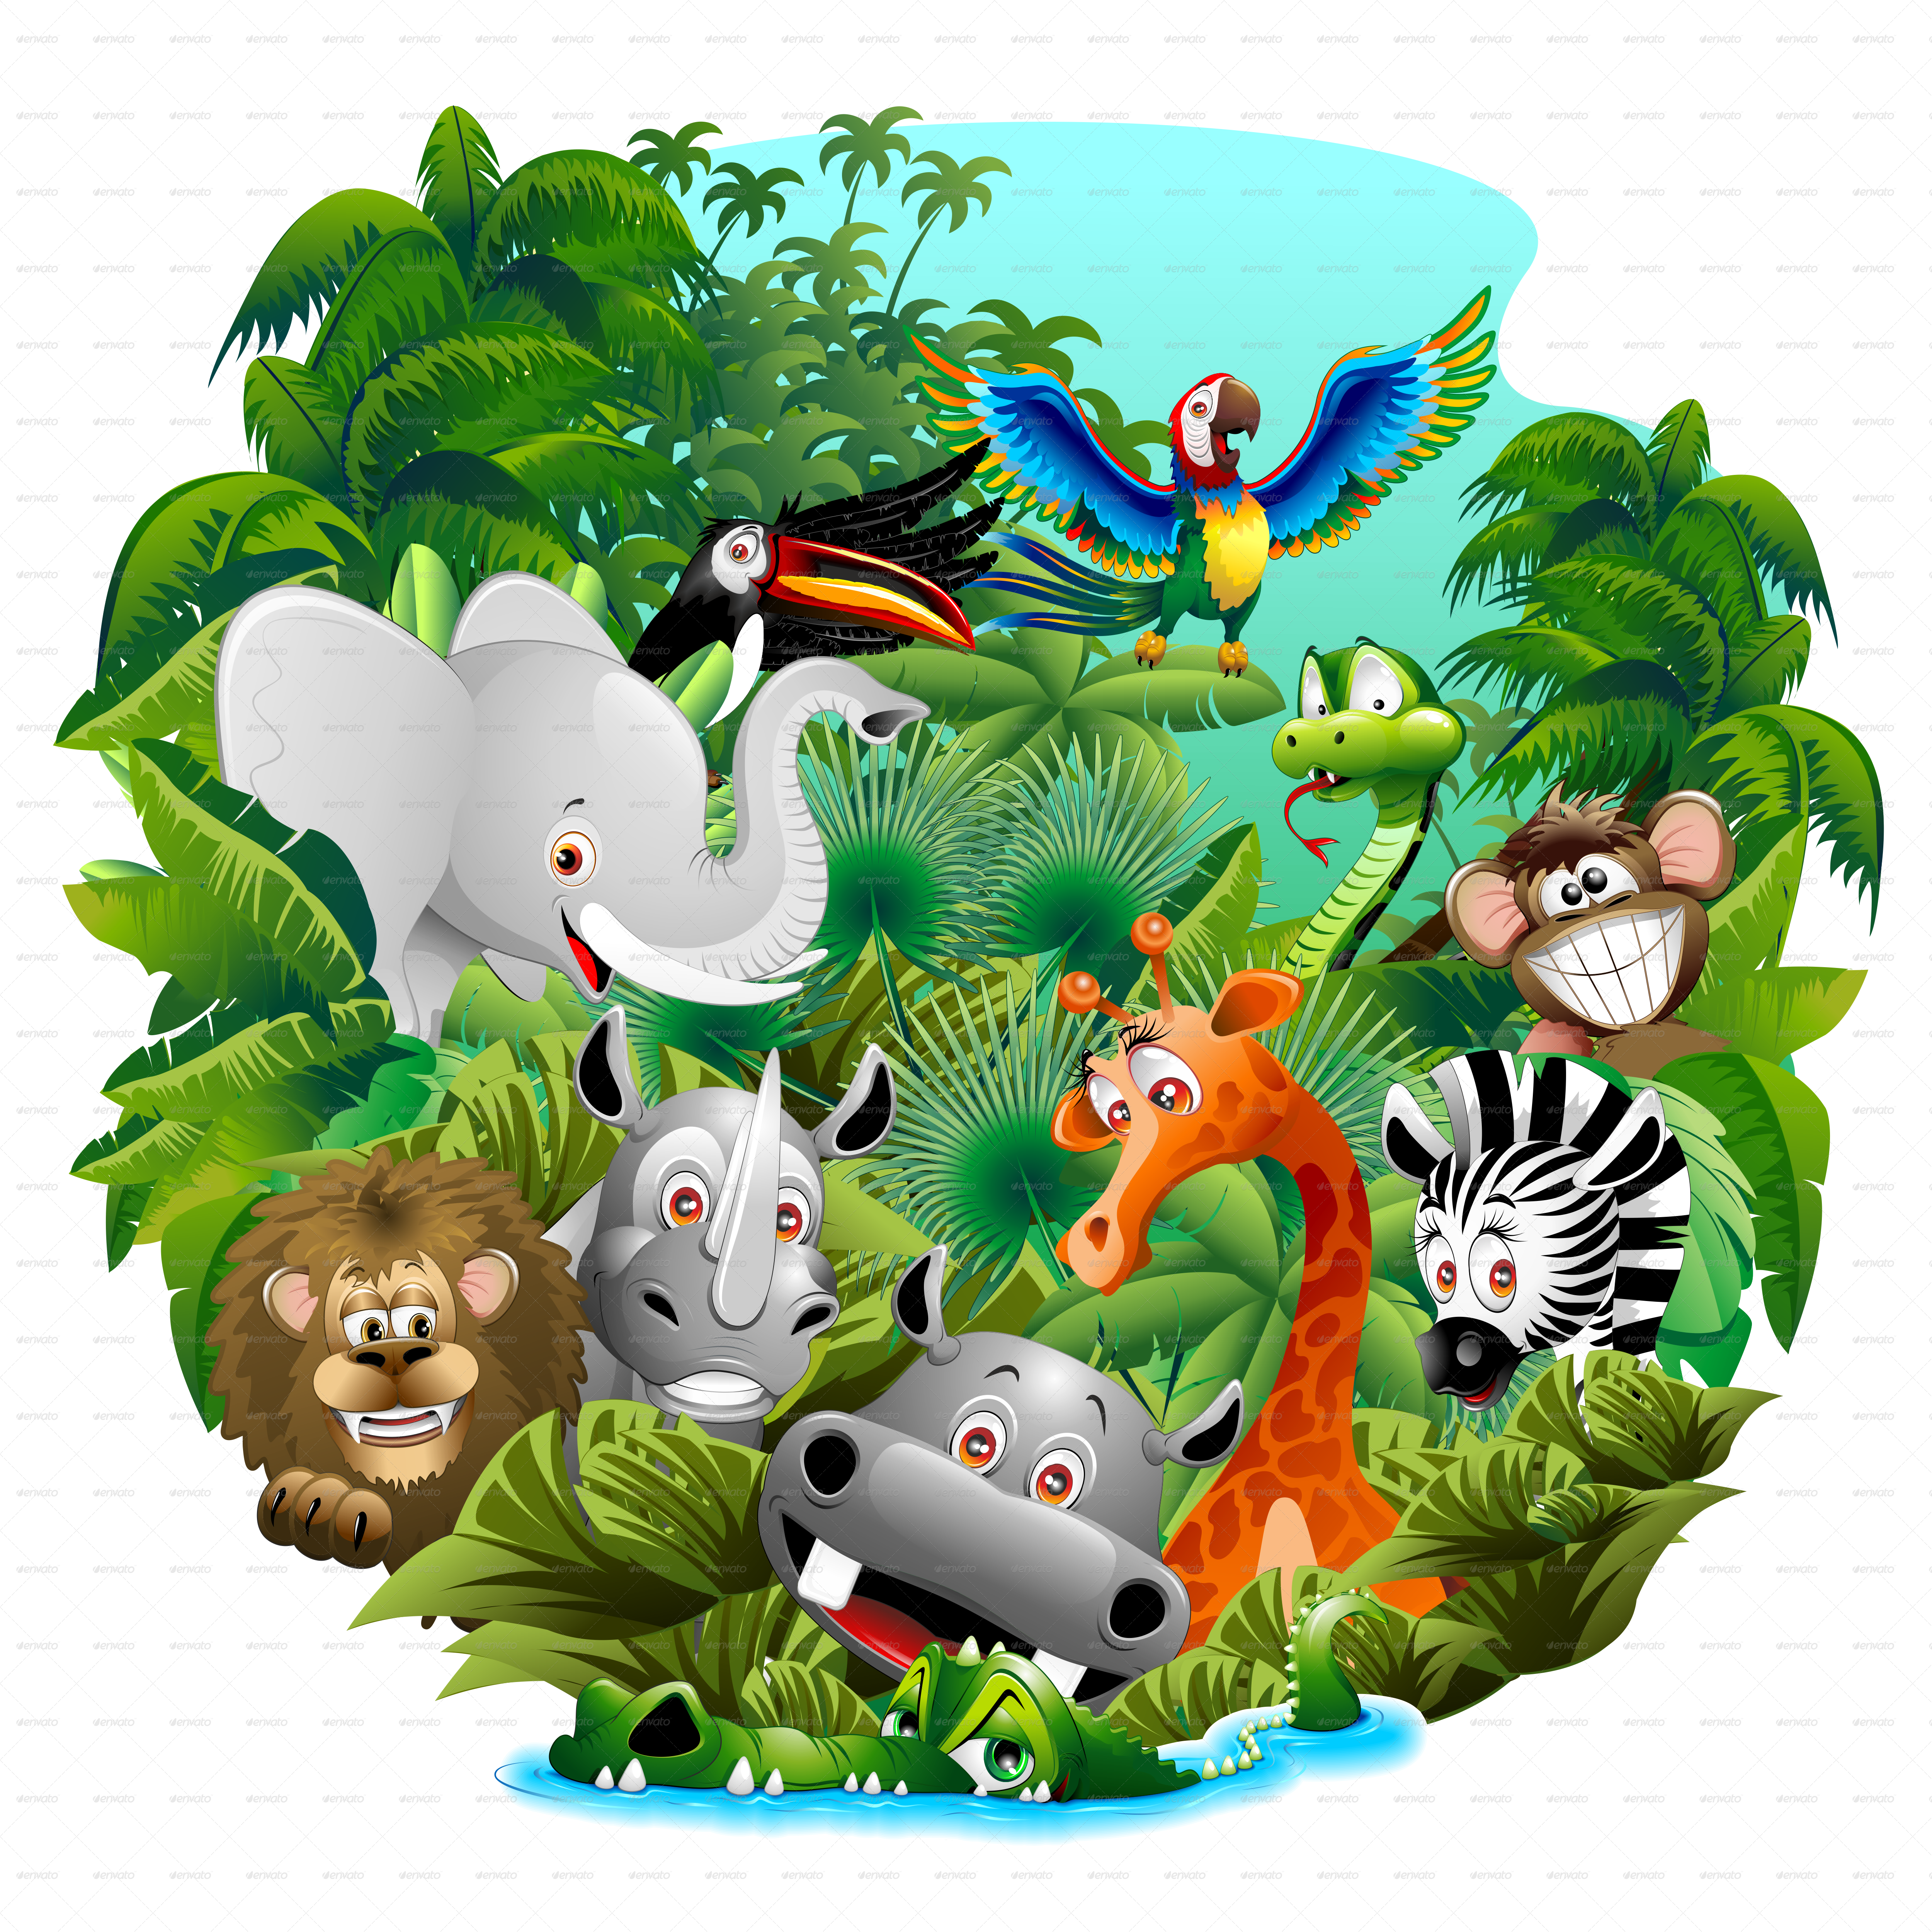 Animals PNG Free Clipart Images - Free Transparent PNG Logos